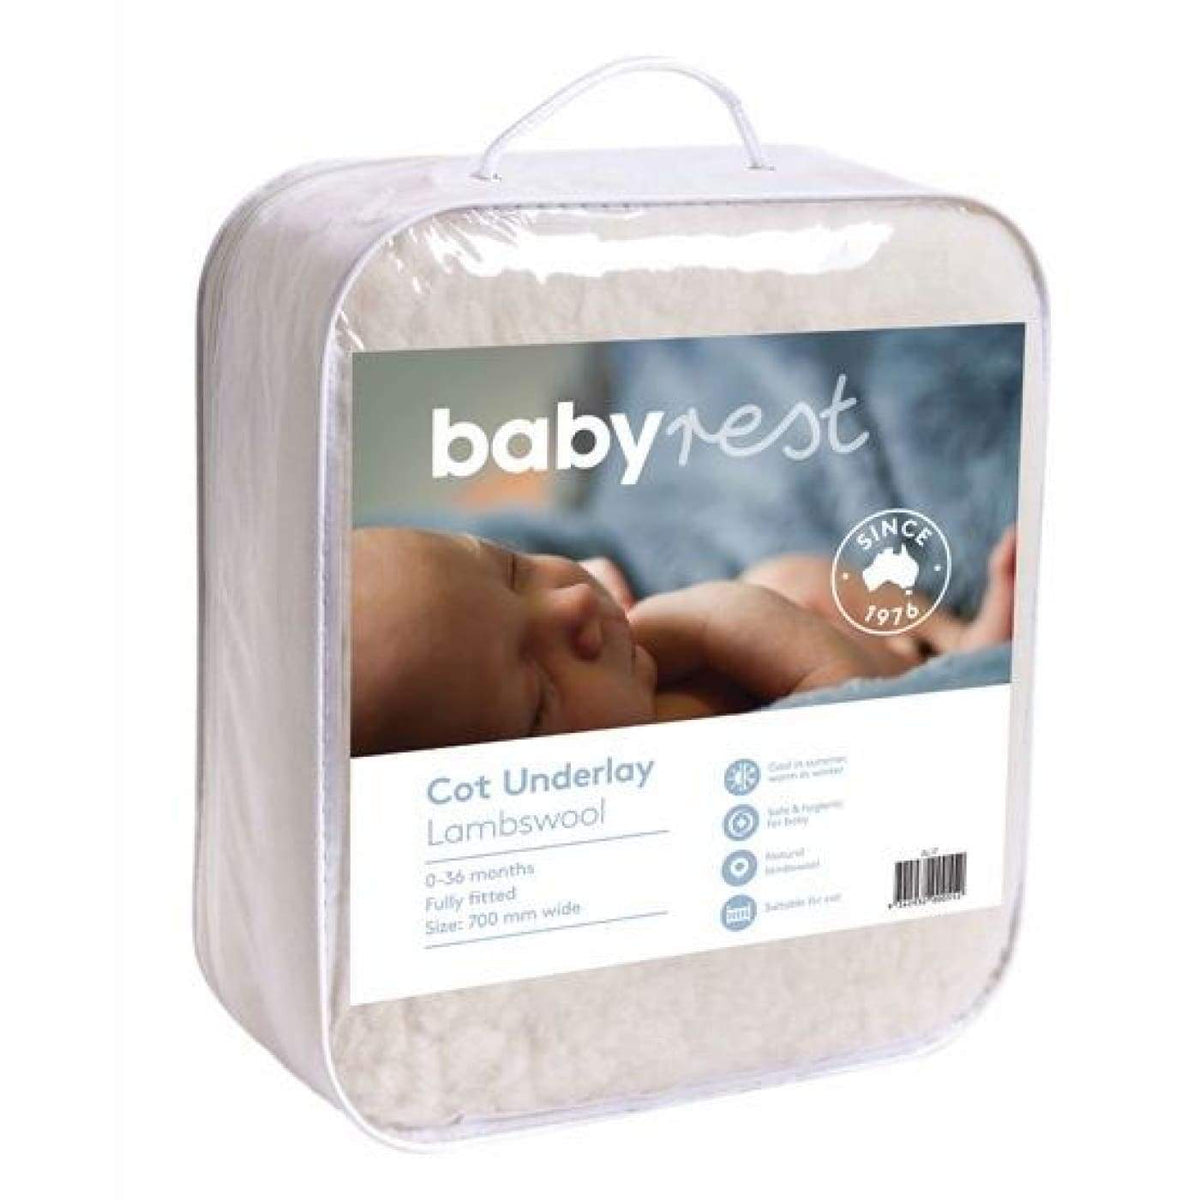 Babyrest Cot Underlay Lambswool Fully Fitted Standard Cot up to 70CM Wide - NURSERY &amp; BEDTIME - COT MATTRESS PROTECTORS